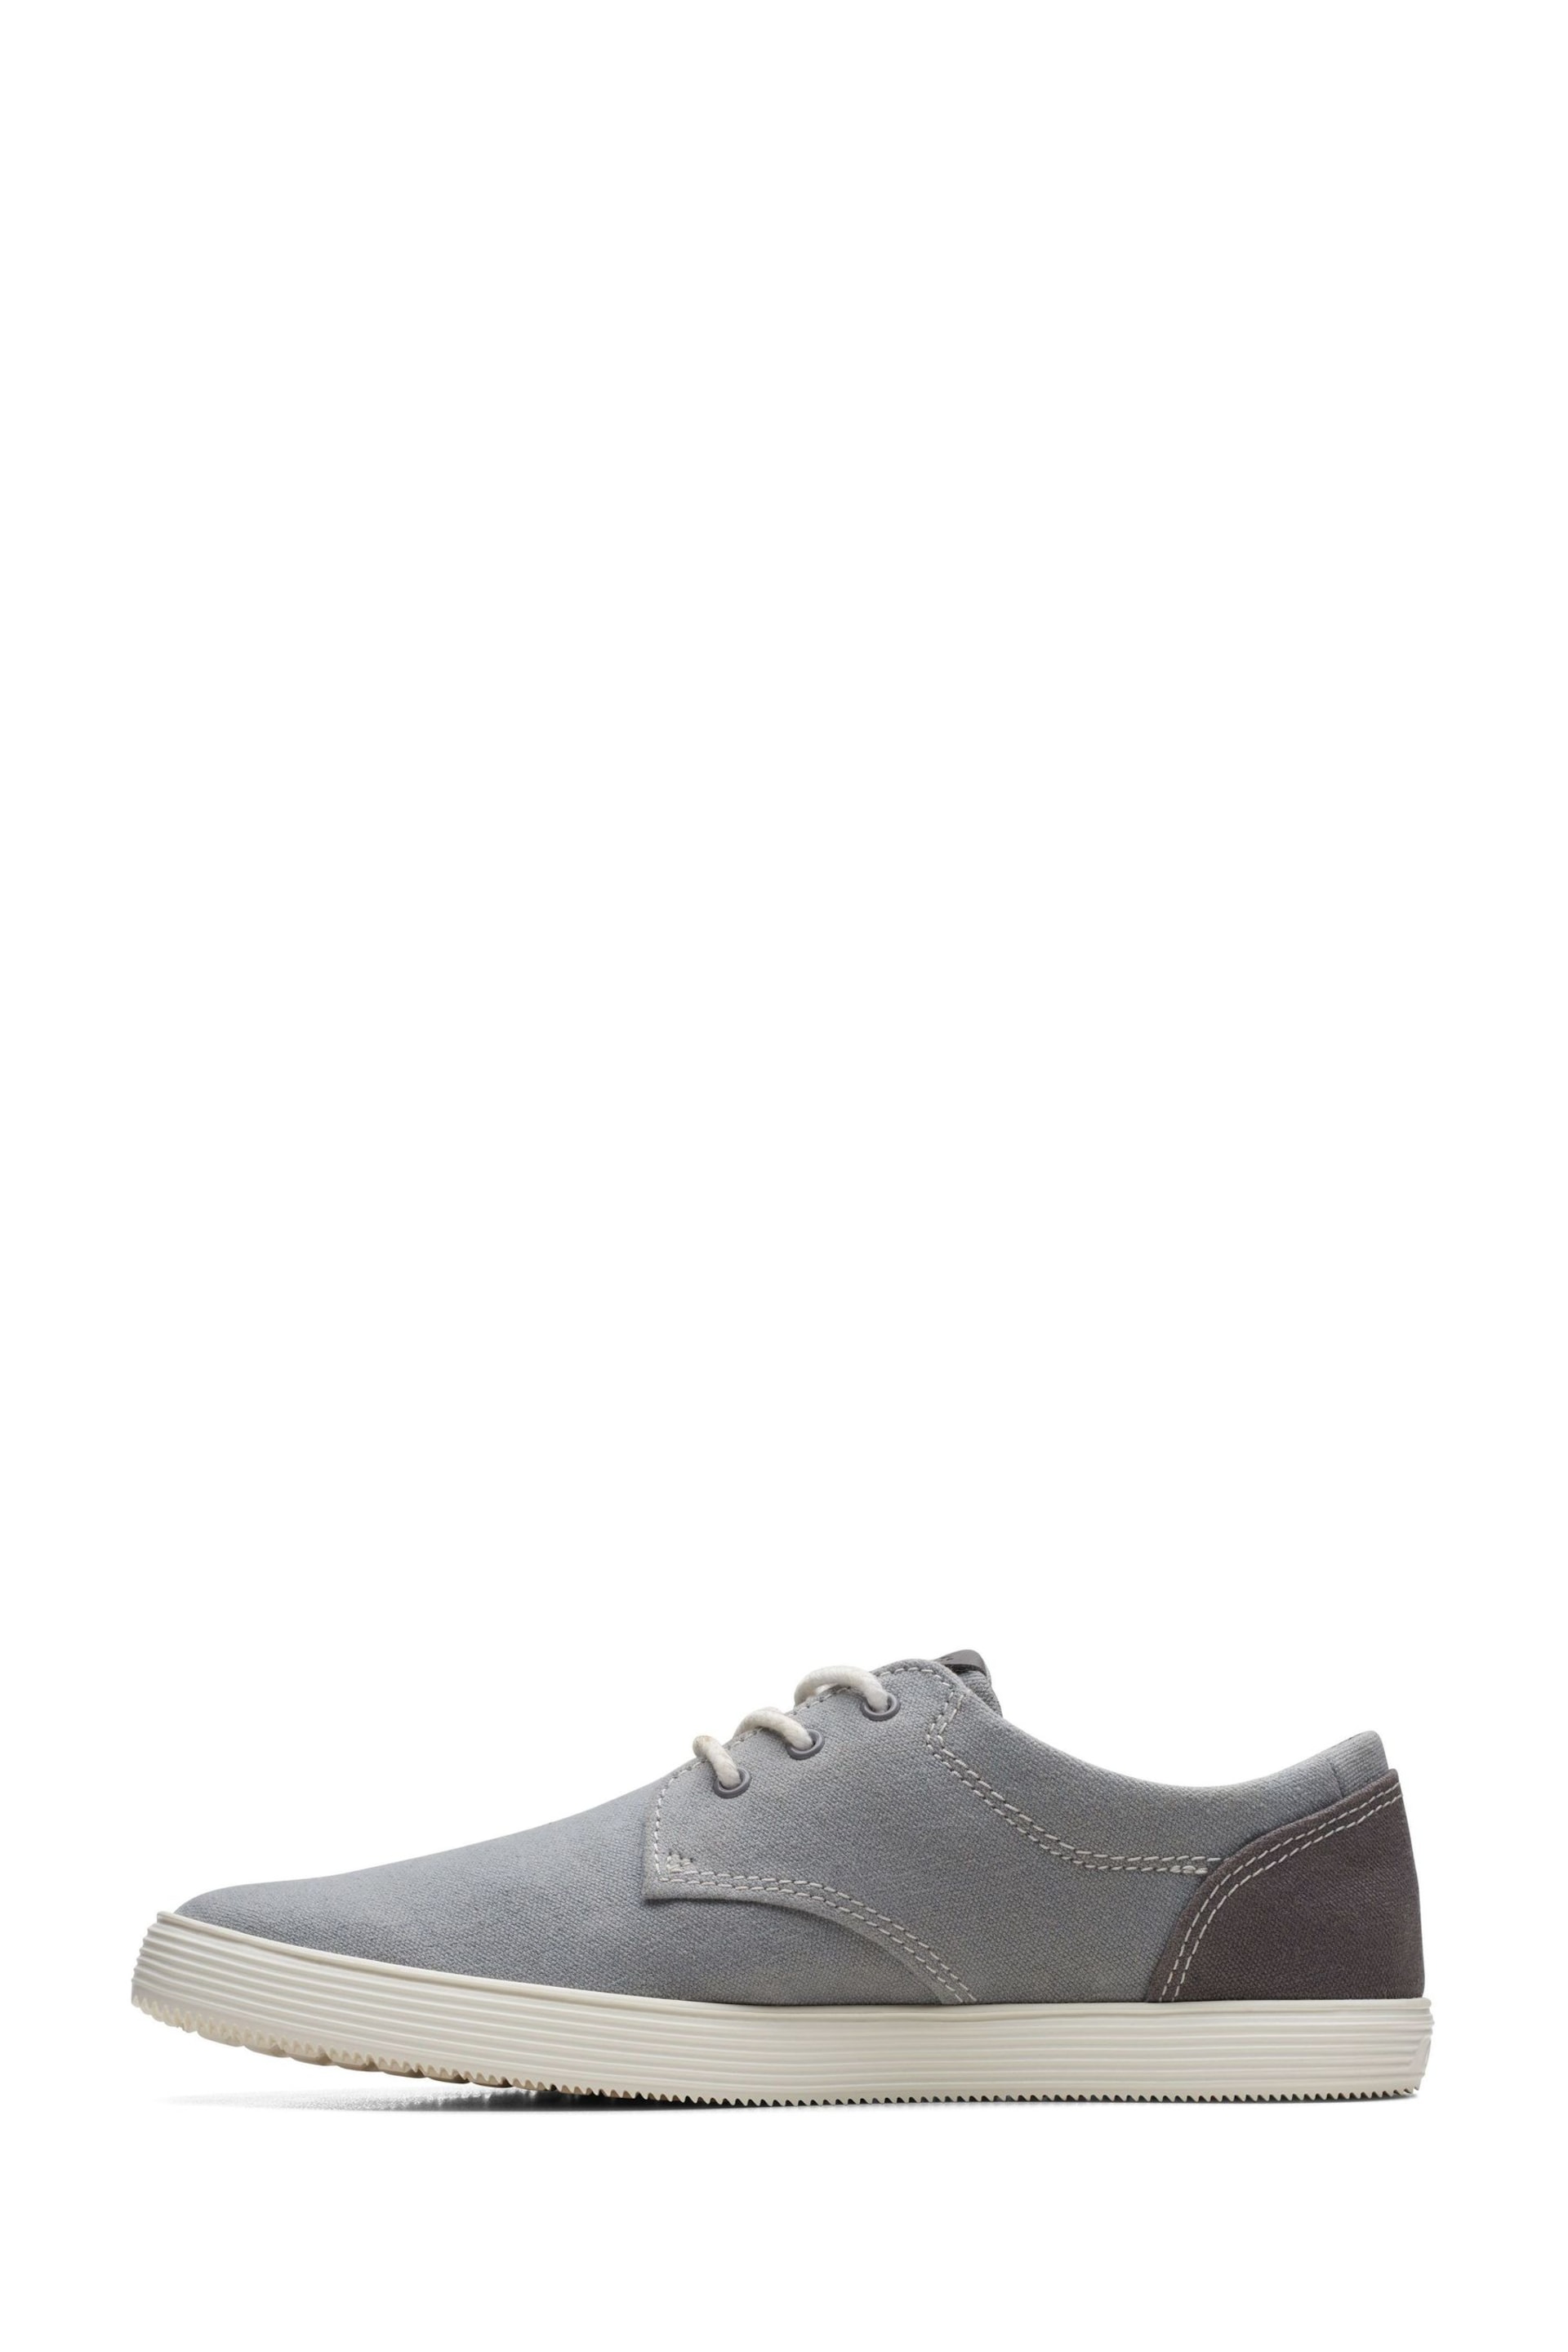 Clarks Grey Canvas Sharkford Walk Shoes - Image 5 of 7